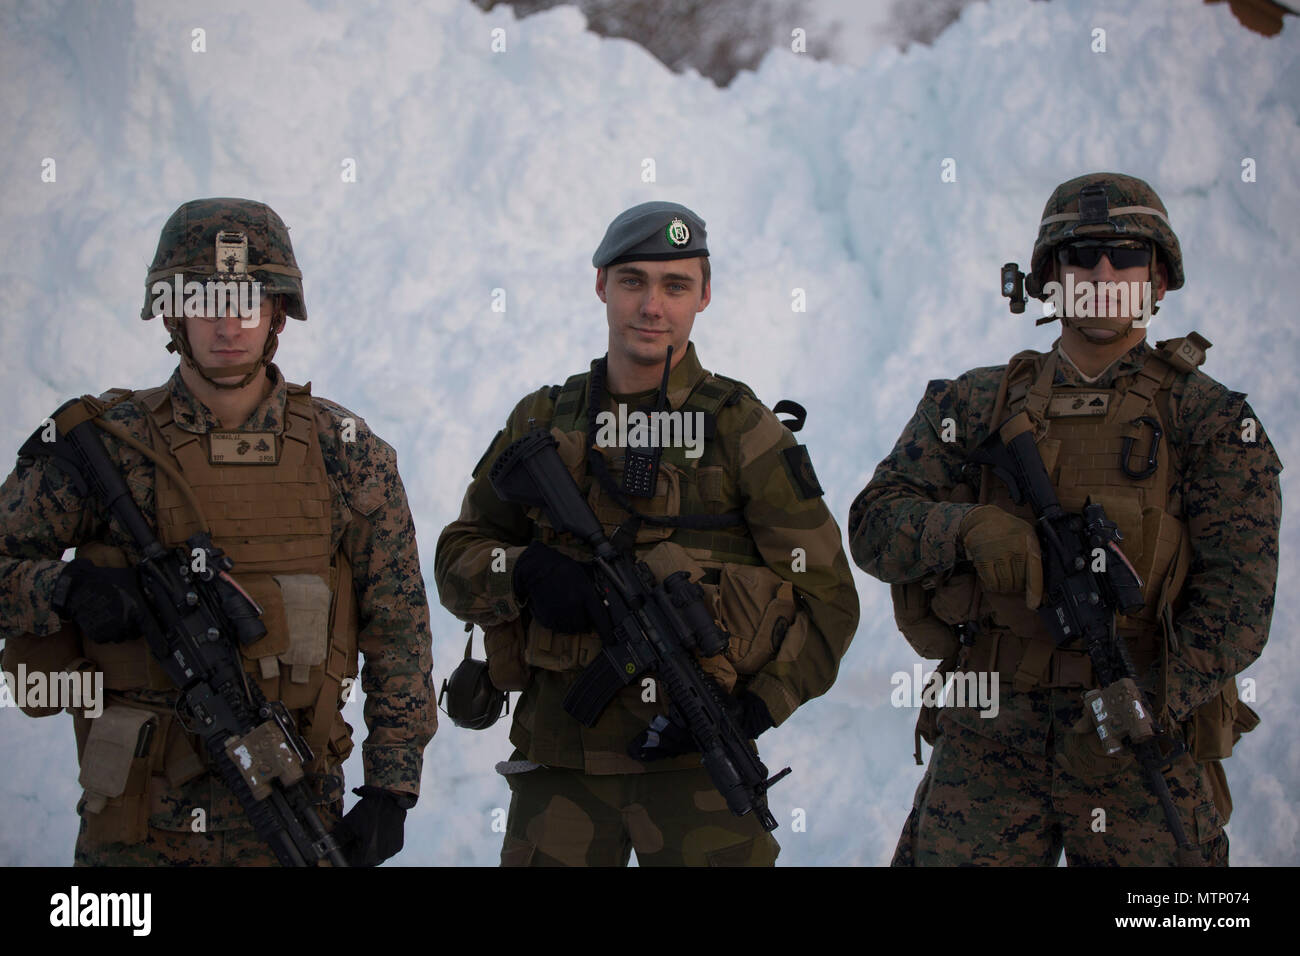 U.S. Marine Corporal Jacob Thomas and Cpl. Eduardo Duranespino stand alongside a Norwegian Army guard at Vaernes Garnison, Norway, Jan. 16, 2017. The Marines with Black Sea Rotational Force 17.1 arrived at Vaernes Garnison early in the morning as part of Marine Rotational Force Europe 17.1. (U.S. Marine Corps photo by Lance Cpl. Victoria Ross) Stock Photo